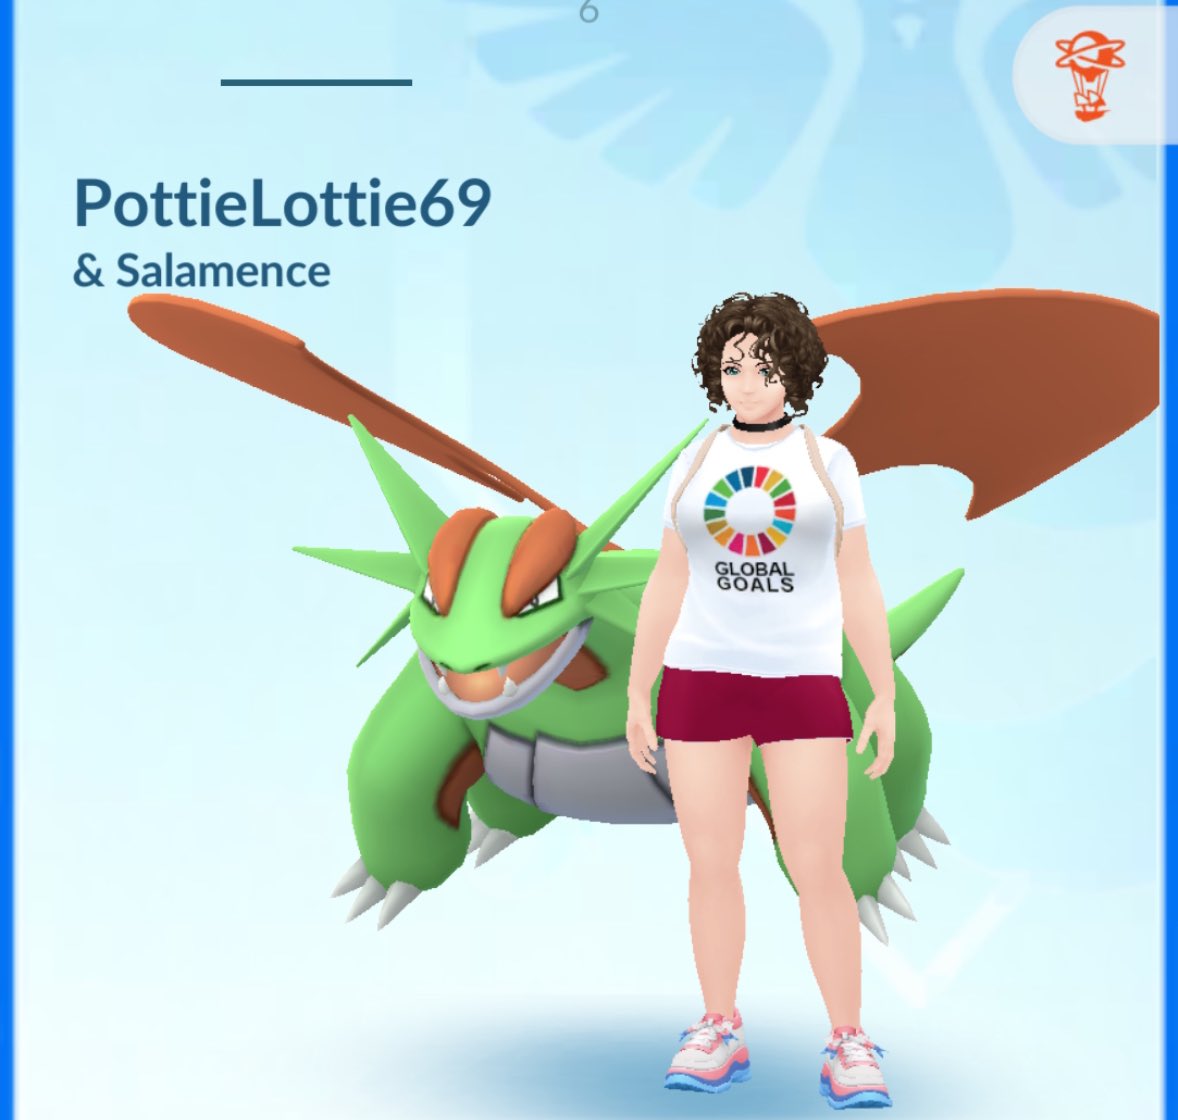 Ummm, call me a nerd but I’m immensely excited that @PokemonGoApp has the @WHO Sustainable Development Goals #SDGs on a T-shirt! They are a call to action to end poverty and inequality, protect the planet, and ensure that all people enjoy health, justice and prosperity. #Pokemon